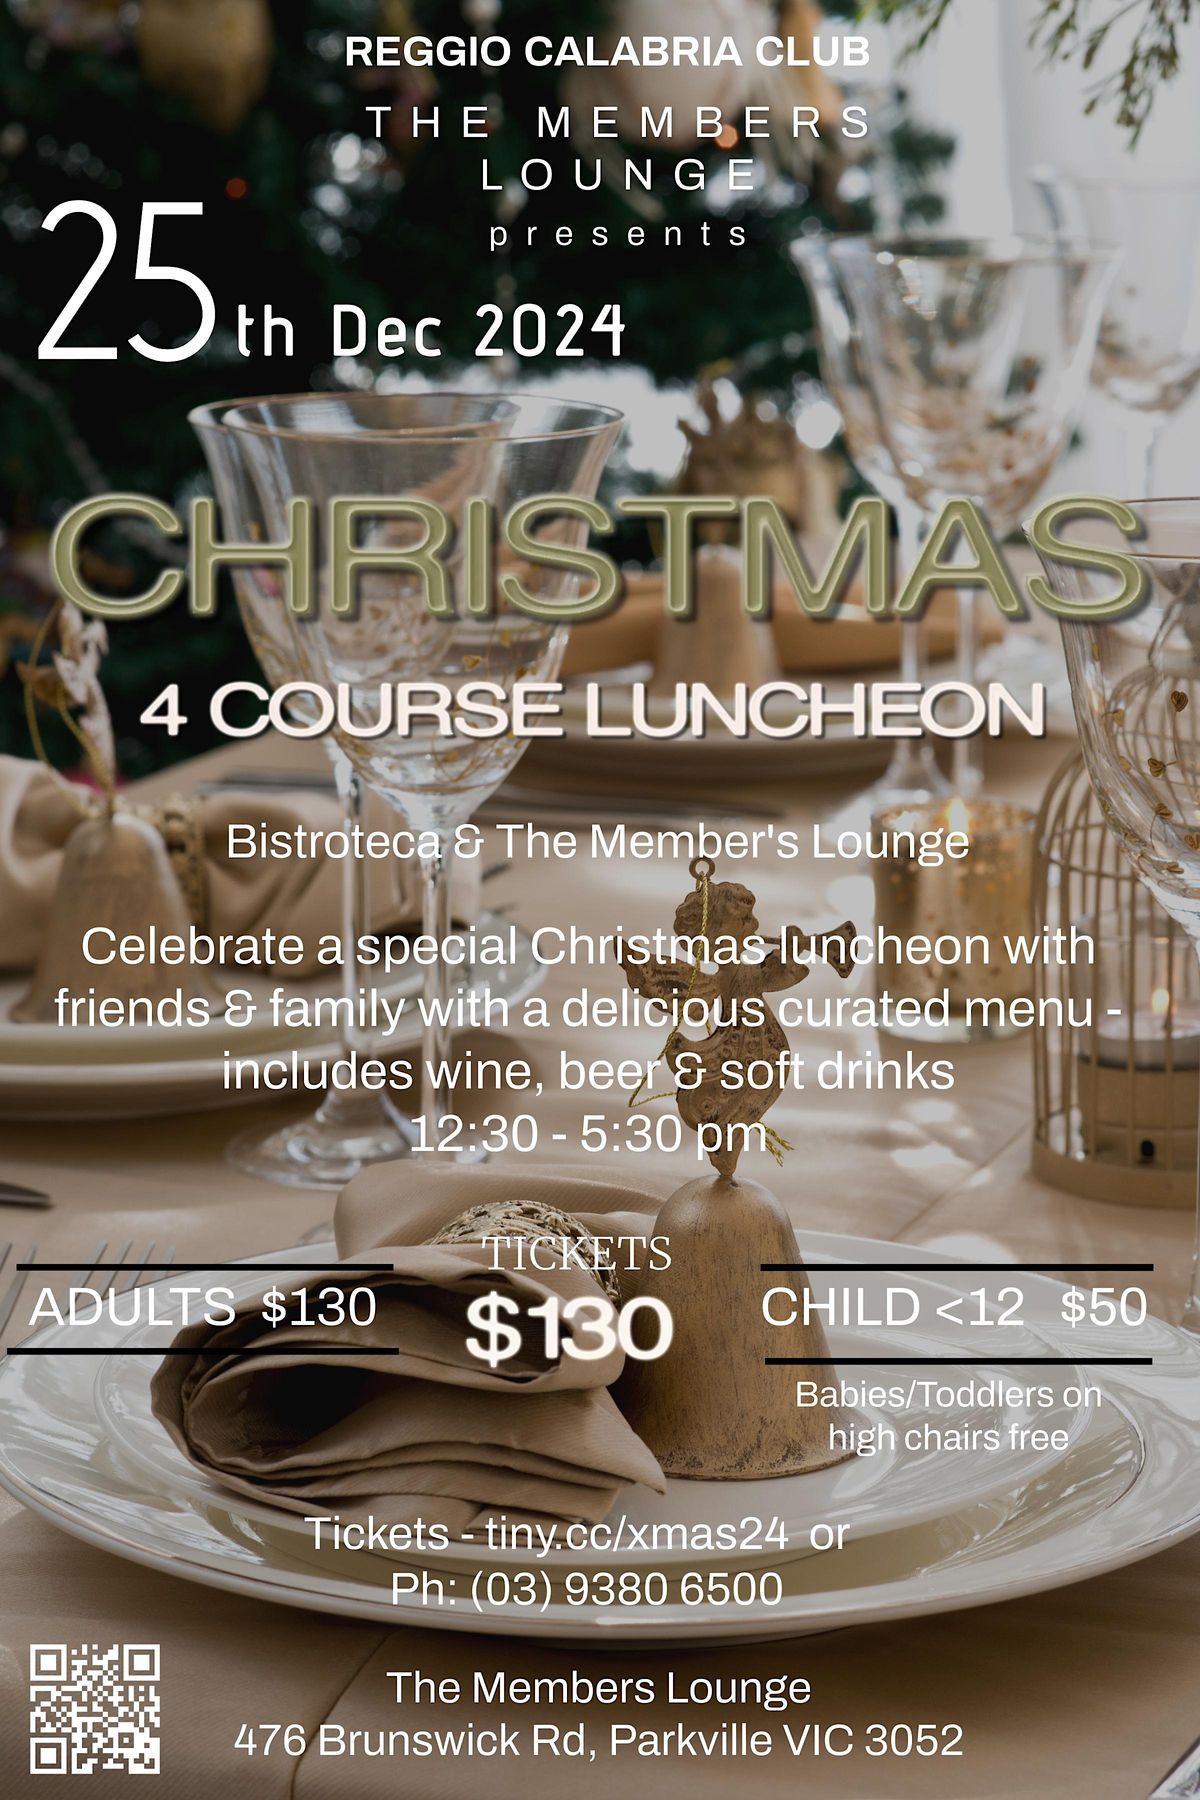 Christmas Luncheon 2024 @ Reggio Calabria Club by The Members Lounge